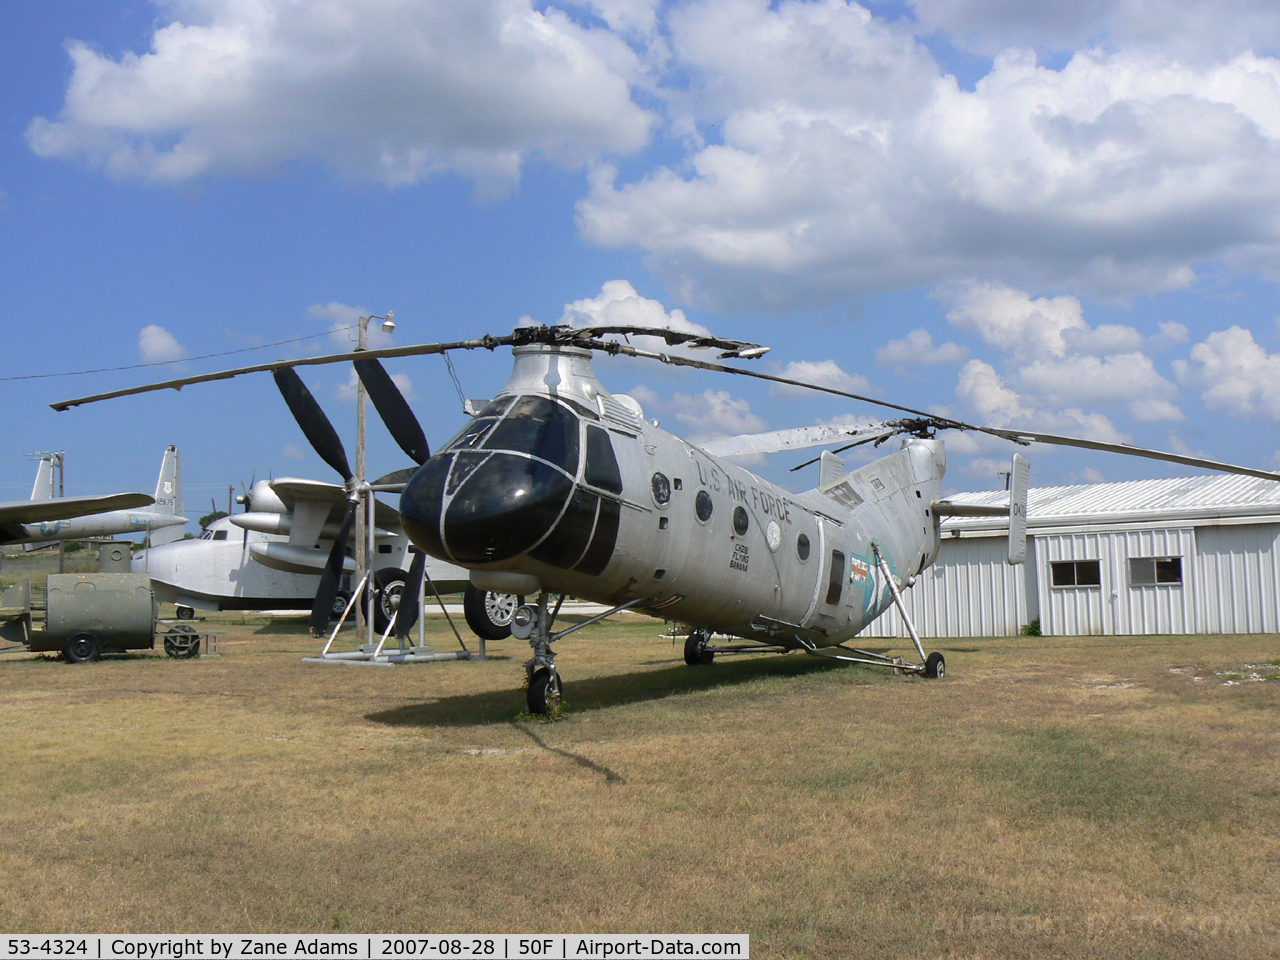 53-4324, 1953 Piasecki CH-21B Workhorse C/N B.74, At the Pate Museum of Transportation near Cresson, TX